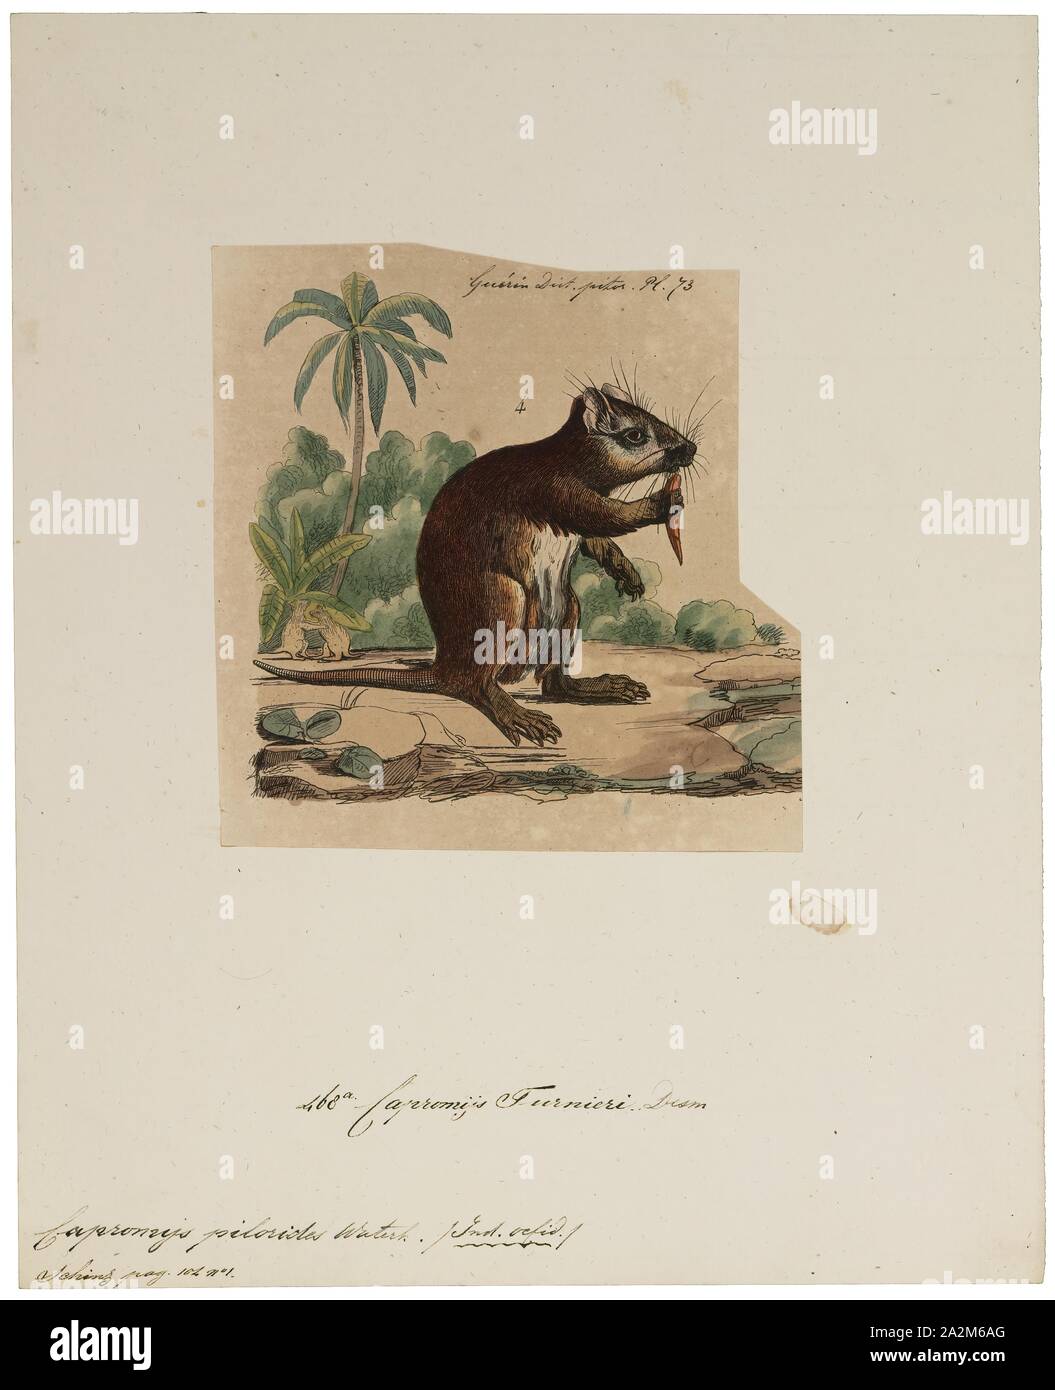 Capromys pilorides, Print, The Desmarest's hutia (Capromys pilorides), also known as the Cuban hutia, is a species of rodent endemic to Cuba, although an extinct subspecies is known from the Cayman Islands. Weighing up to 8.5 kg (19 lb), it is the largest of the extant species of hutia (the extinct giant hutias were far larger)., 1700-1880 Stock Photo